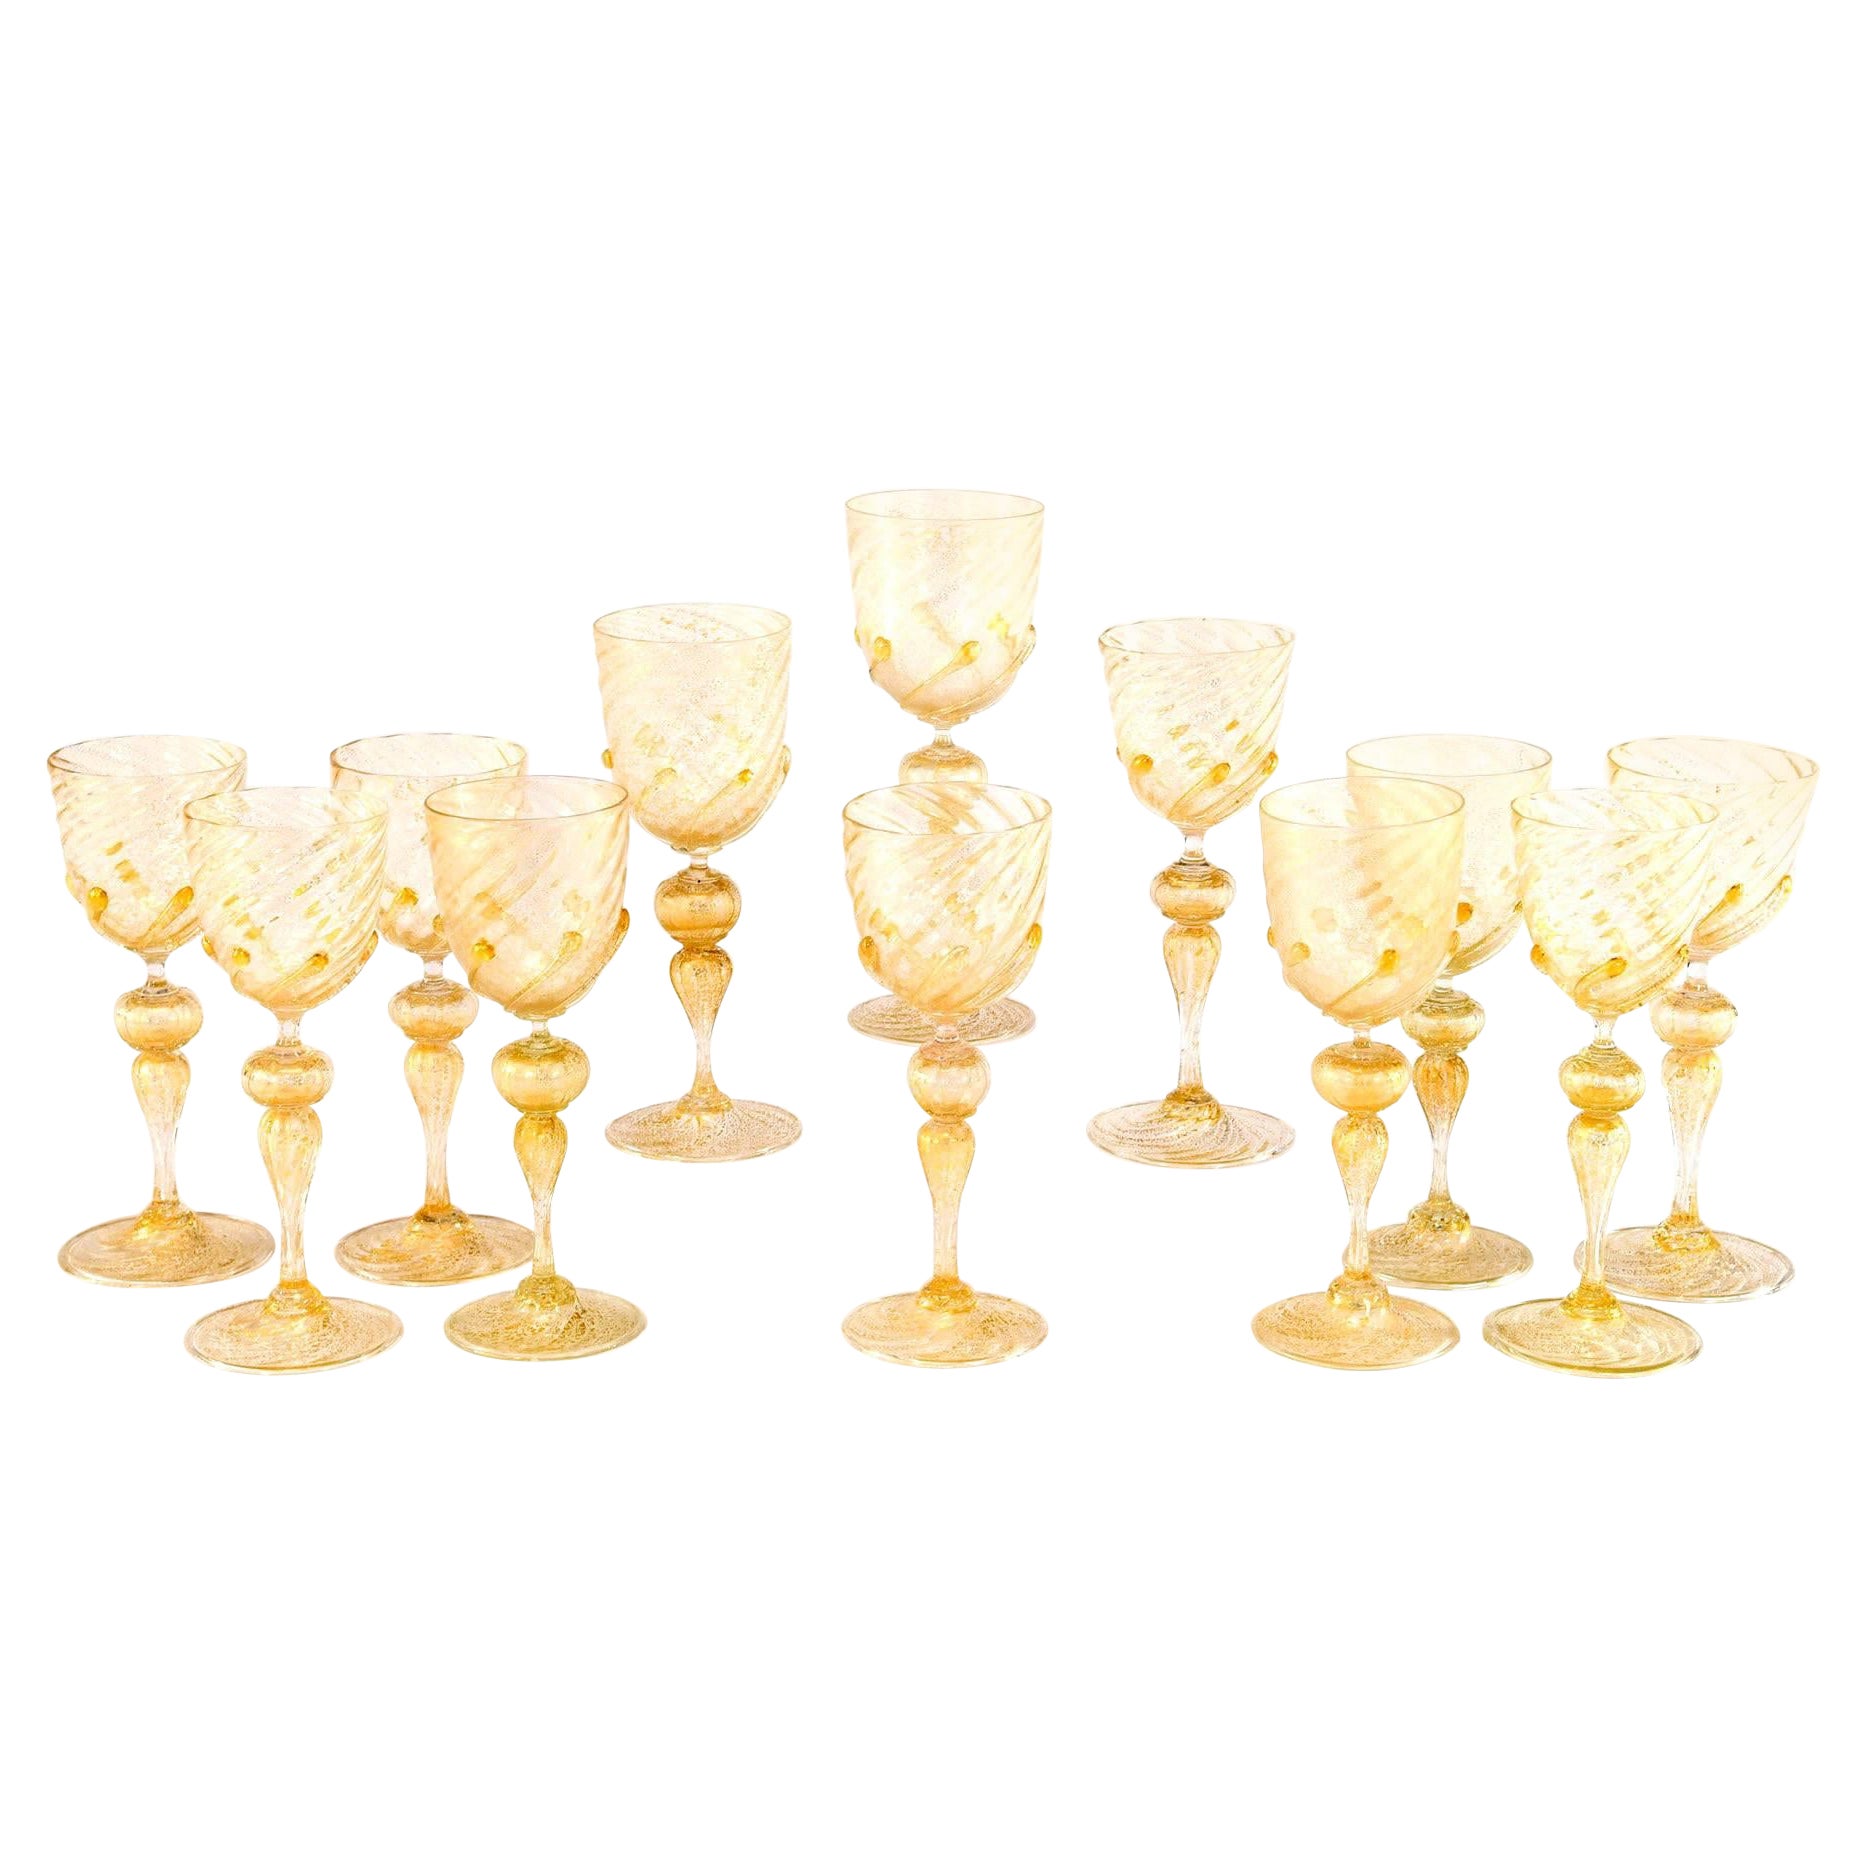 12 Venetian Salviati Large Goblets W/ Gold Leaf Inclusions & Applied Prunts 